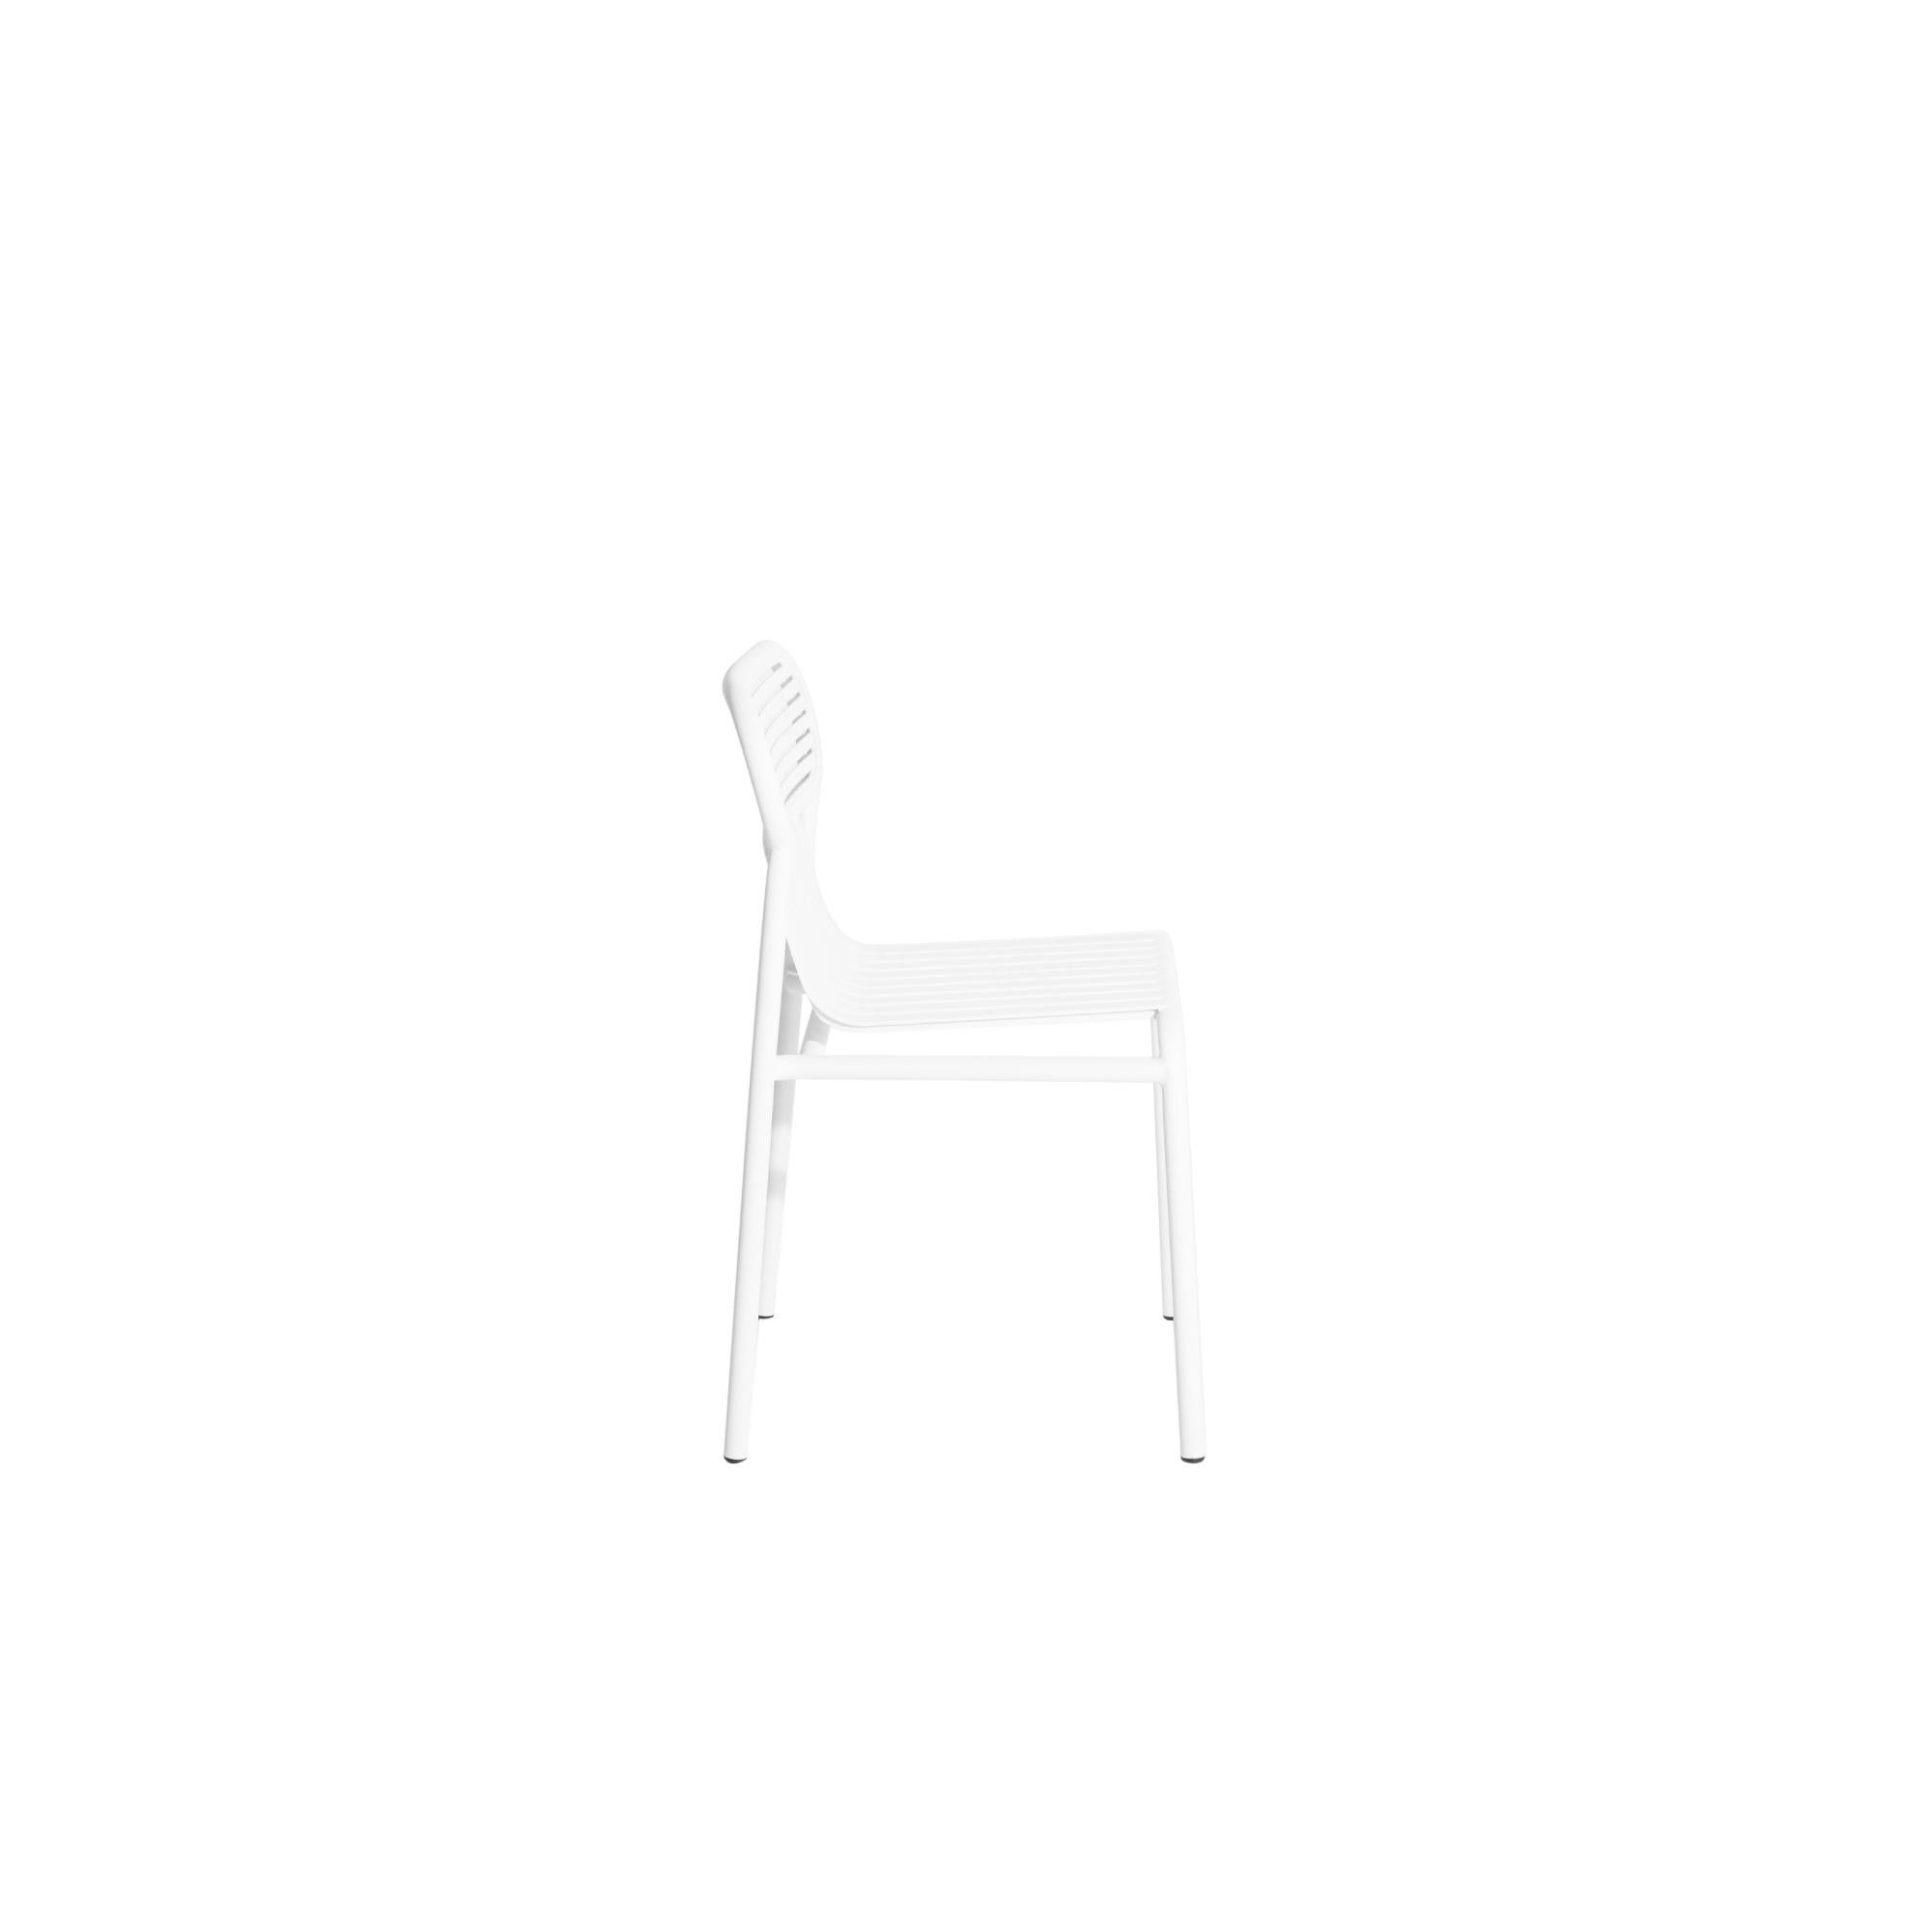 Chinese Petite Friture Week-End Chair in White Aluminium by Studio BrichetZiegler For Sale